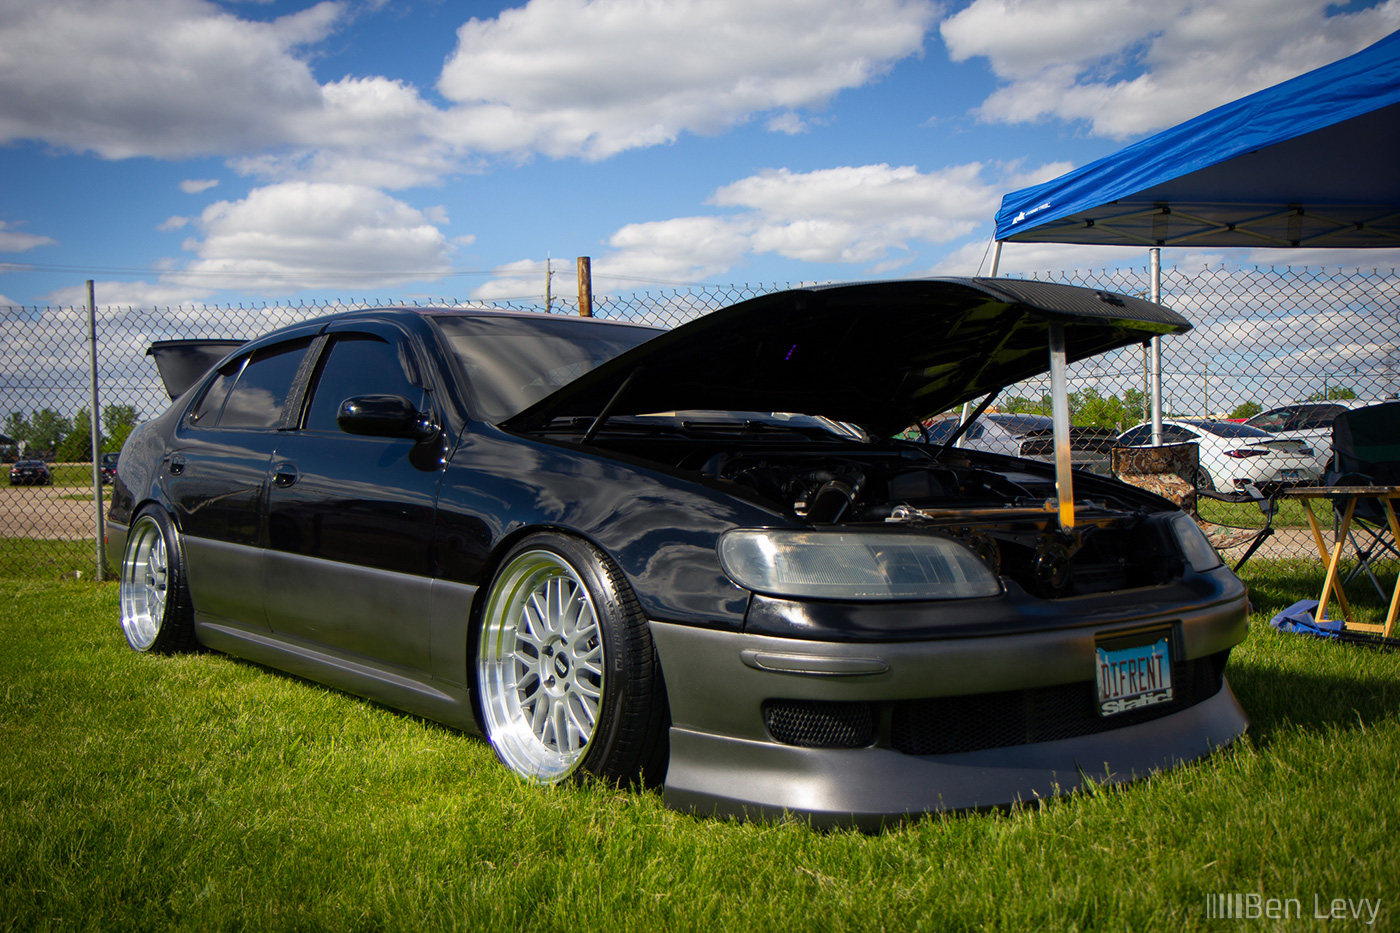 Black Lexus GS300 at a Car Show in Rockford Speedway